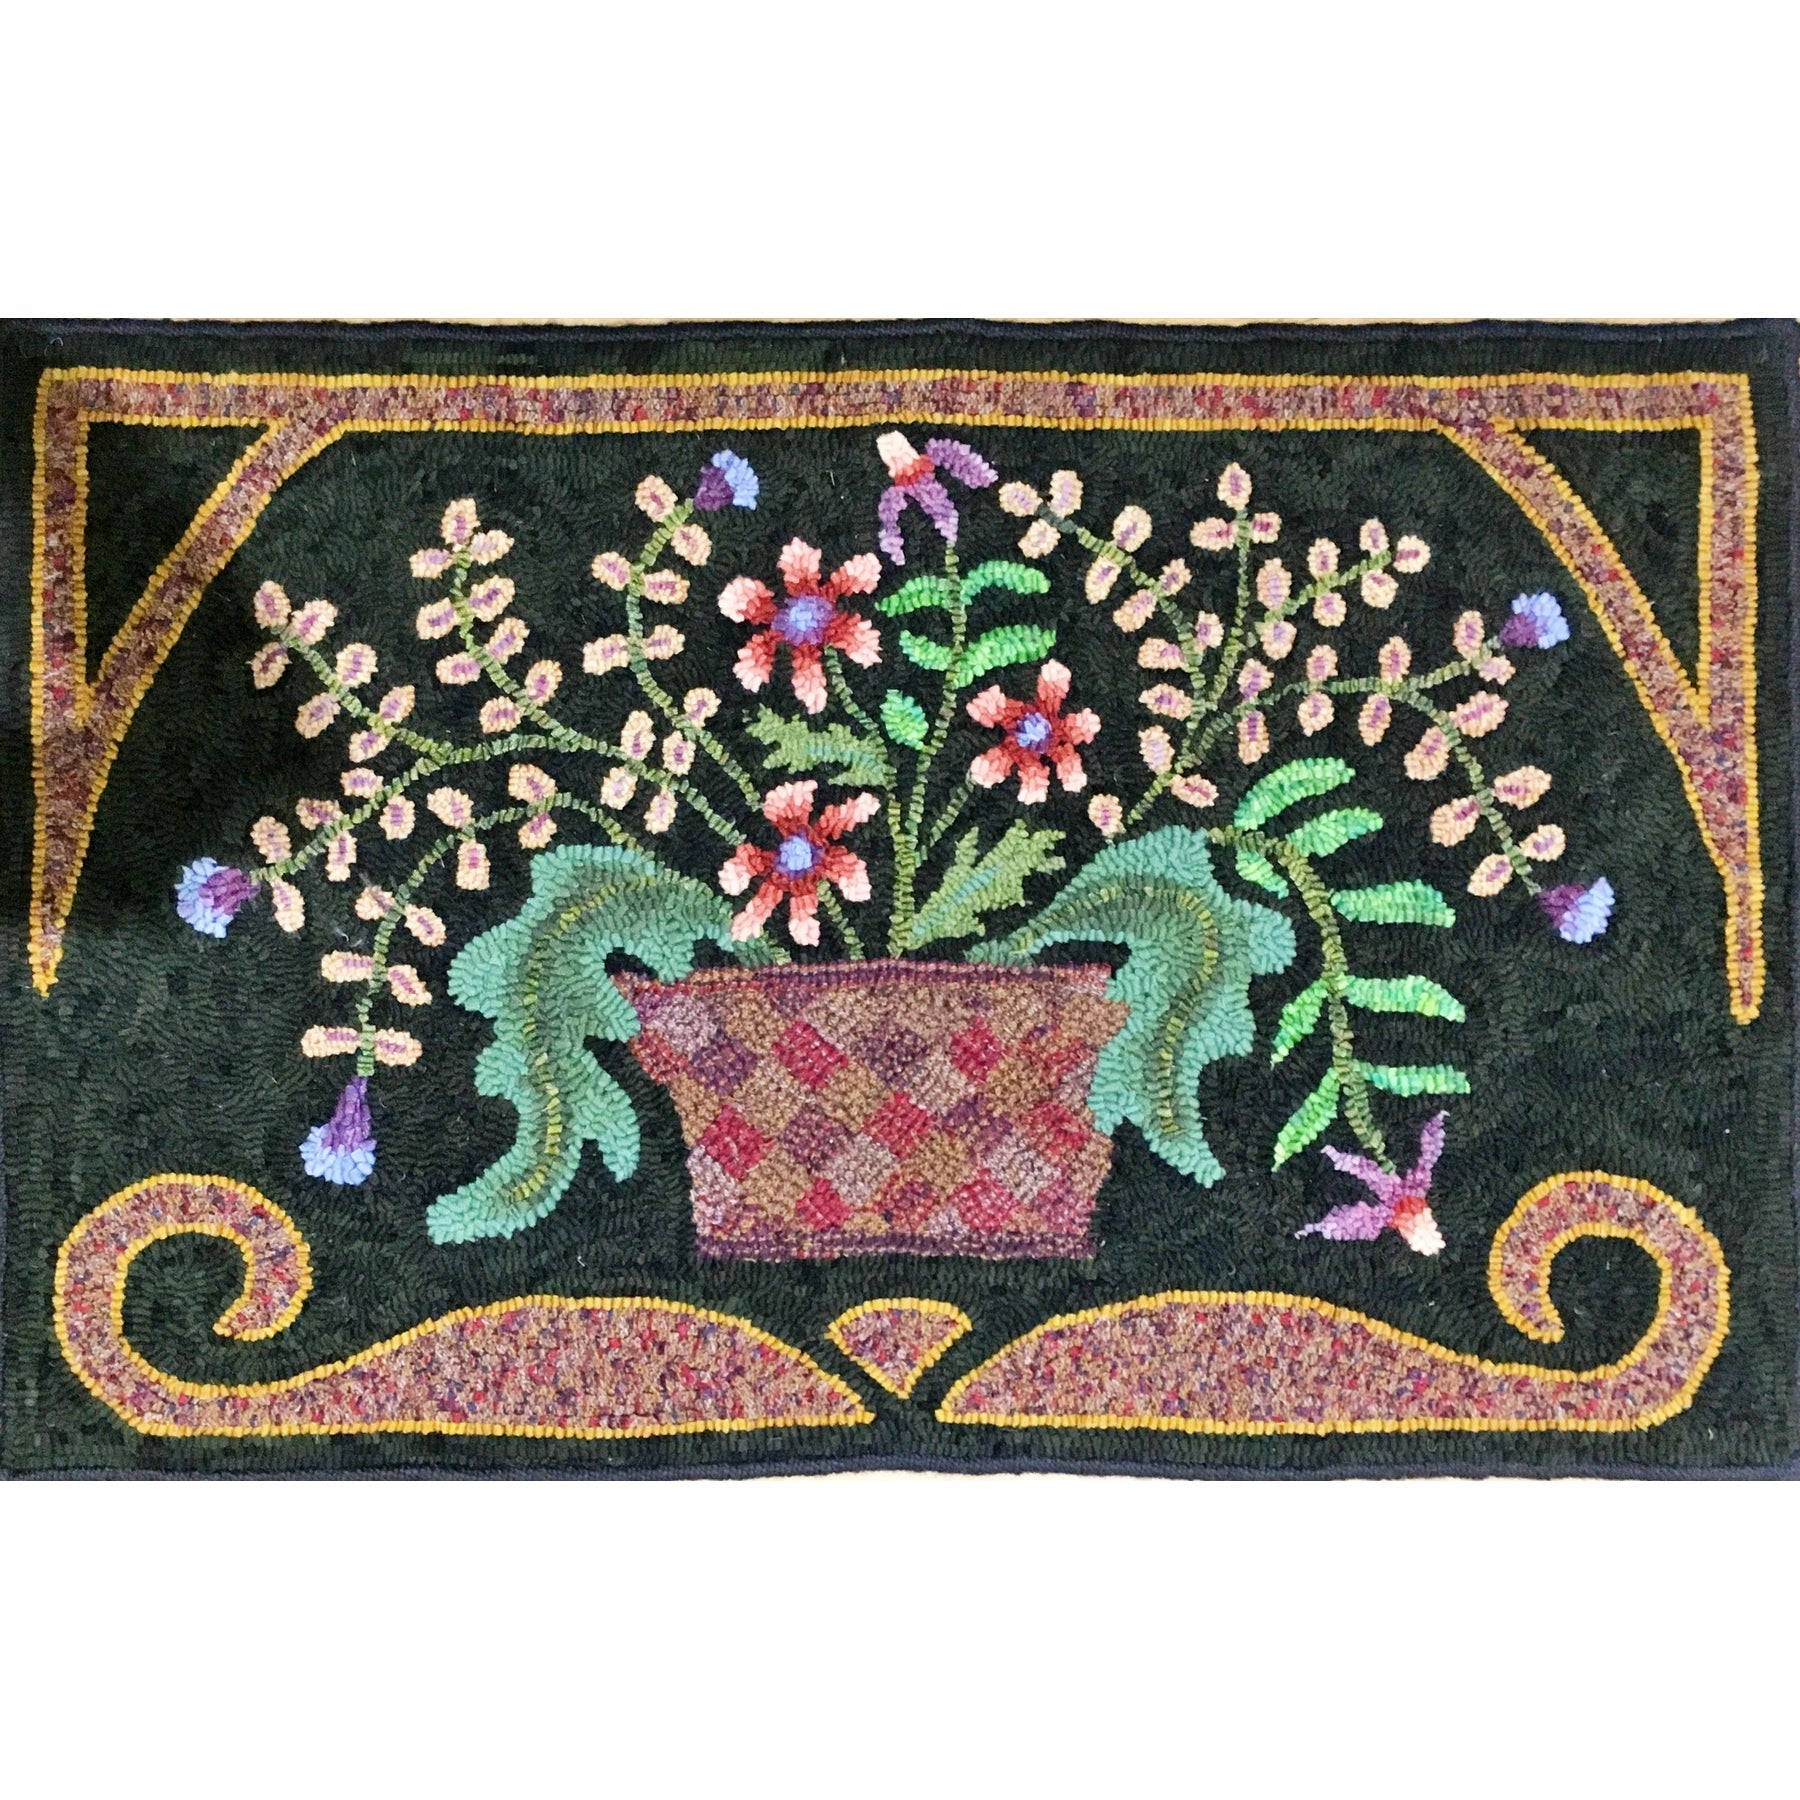 Basket Of Flowers, rug hooked by Vivily Powers